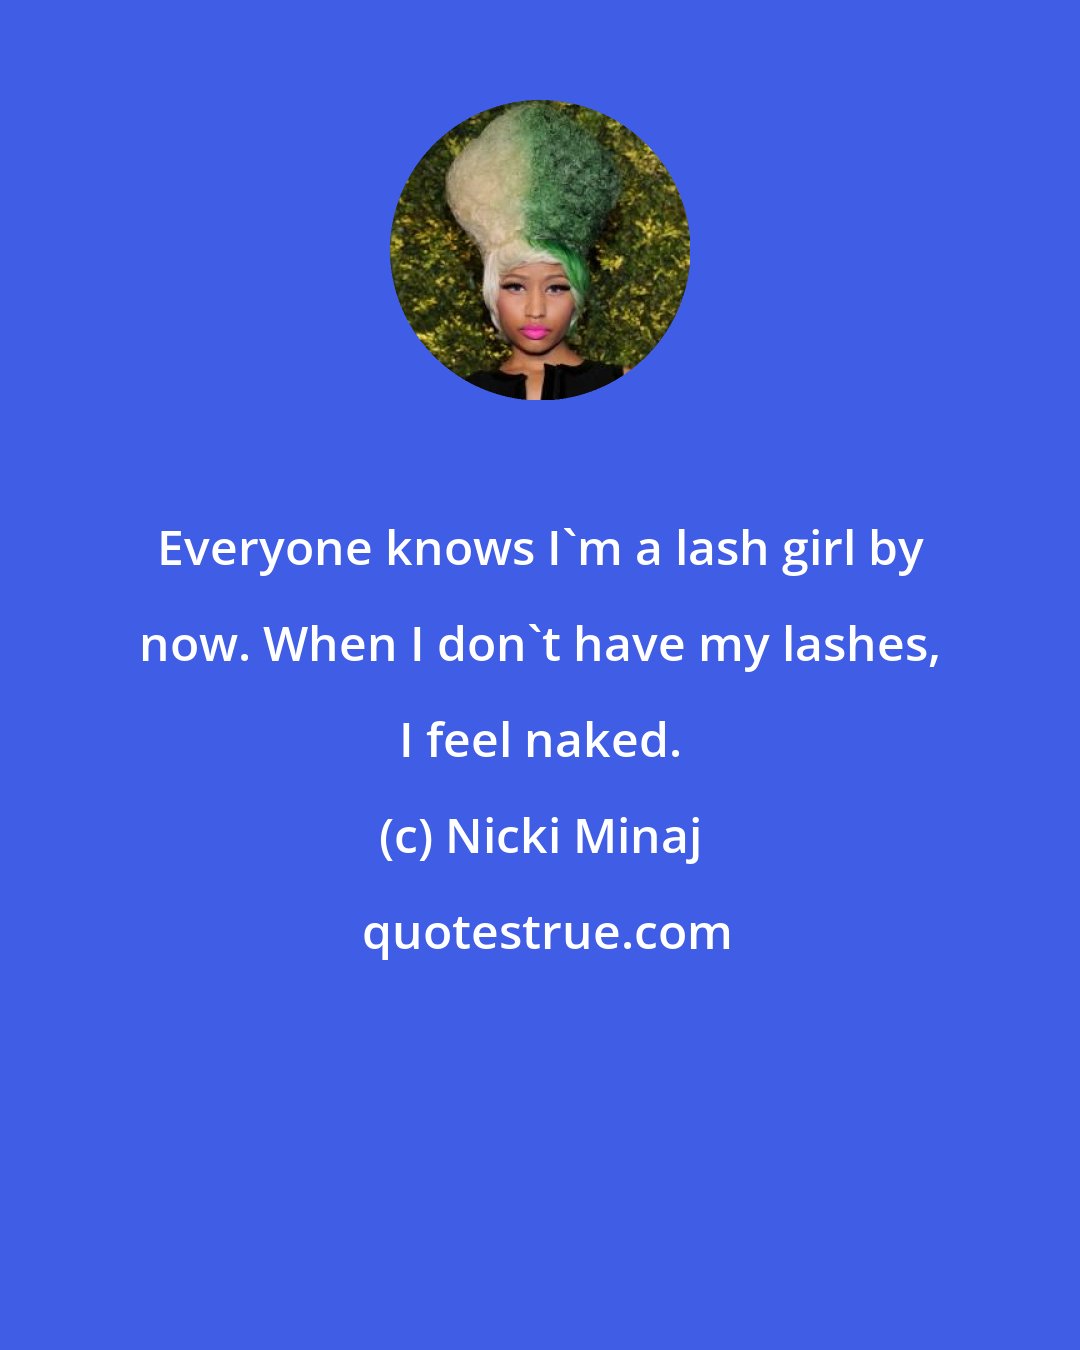 Nicki Minaj: Everyone knows I'm a lash girl by now. When I don't have my lashes, I feel naked.